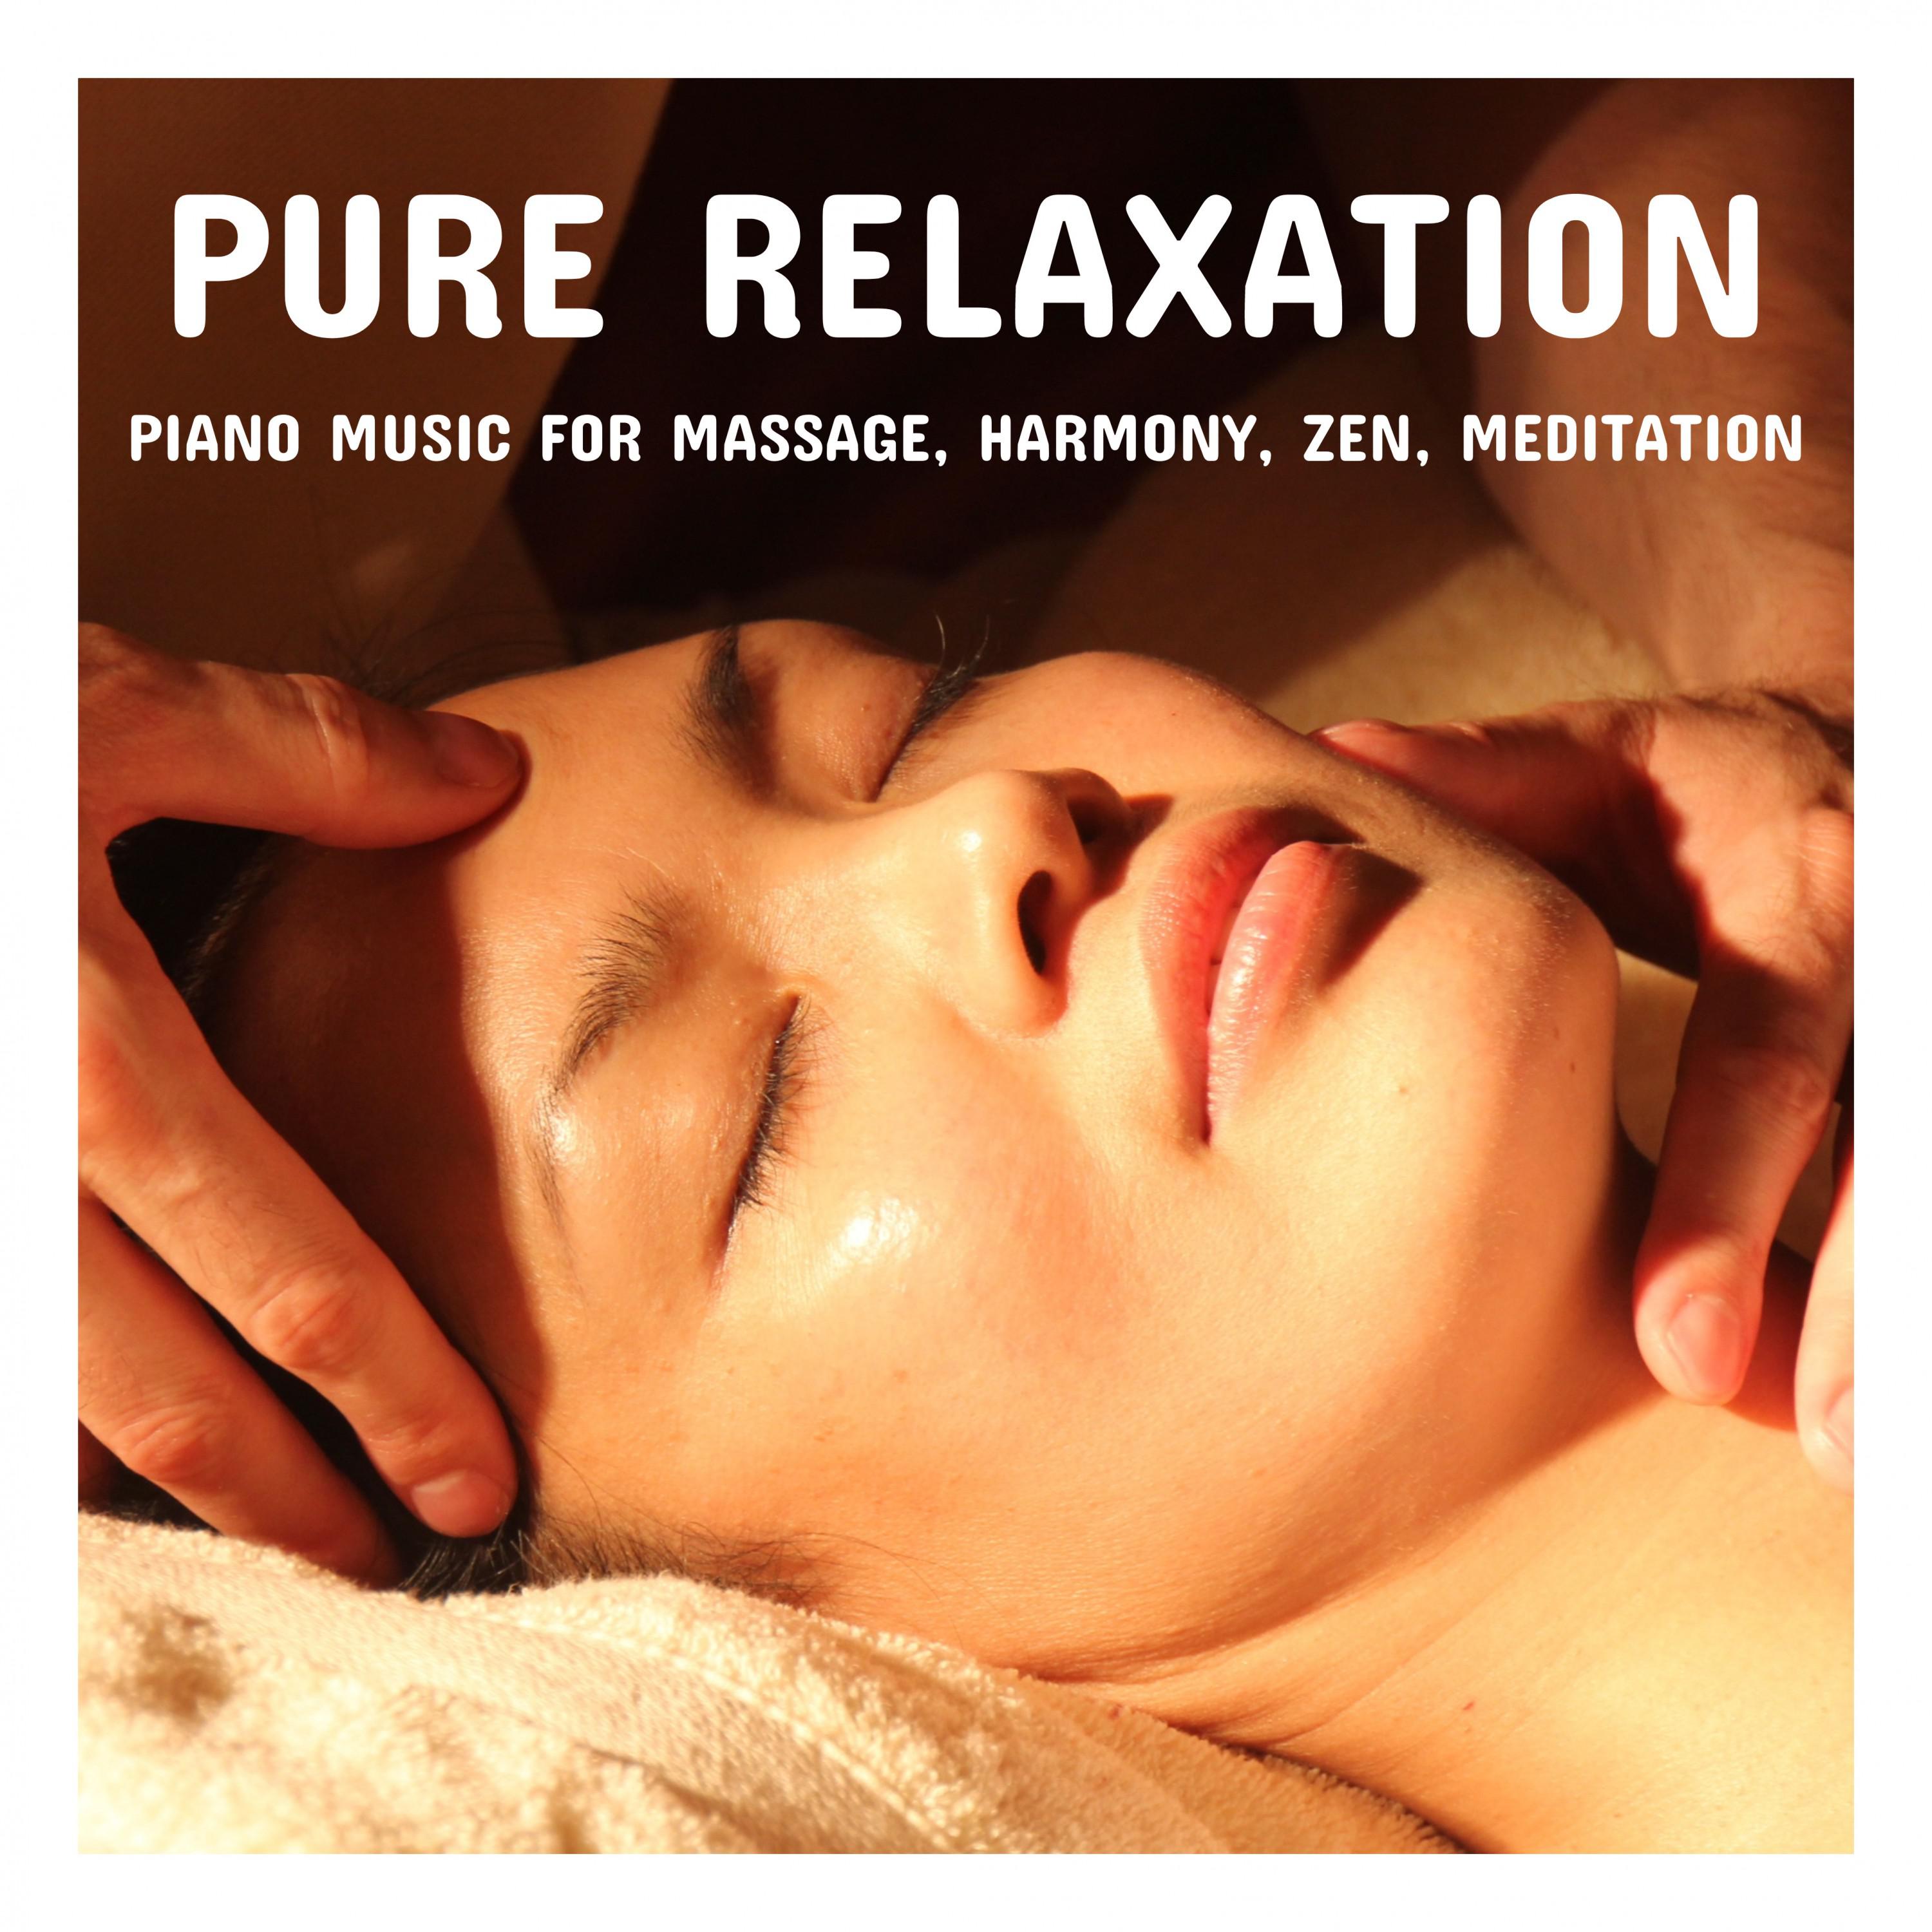 Pure Relaxation Piano Music for Massage, Harmony, Zen, Meditation, Sleep, Inner Peace, Quiet Melody